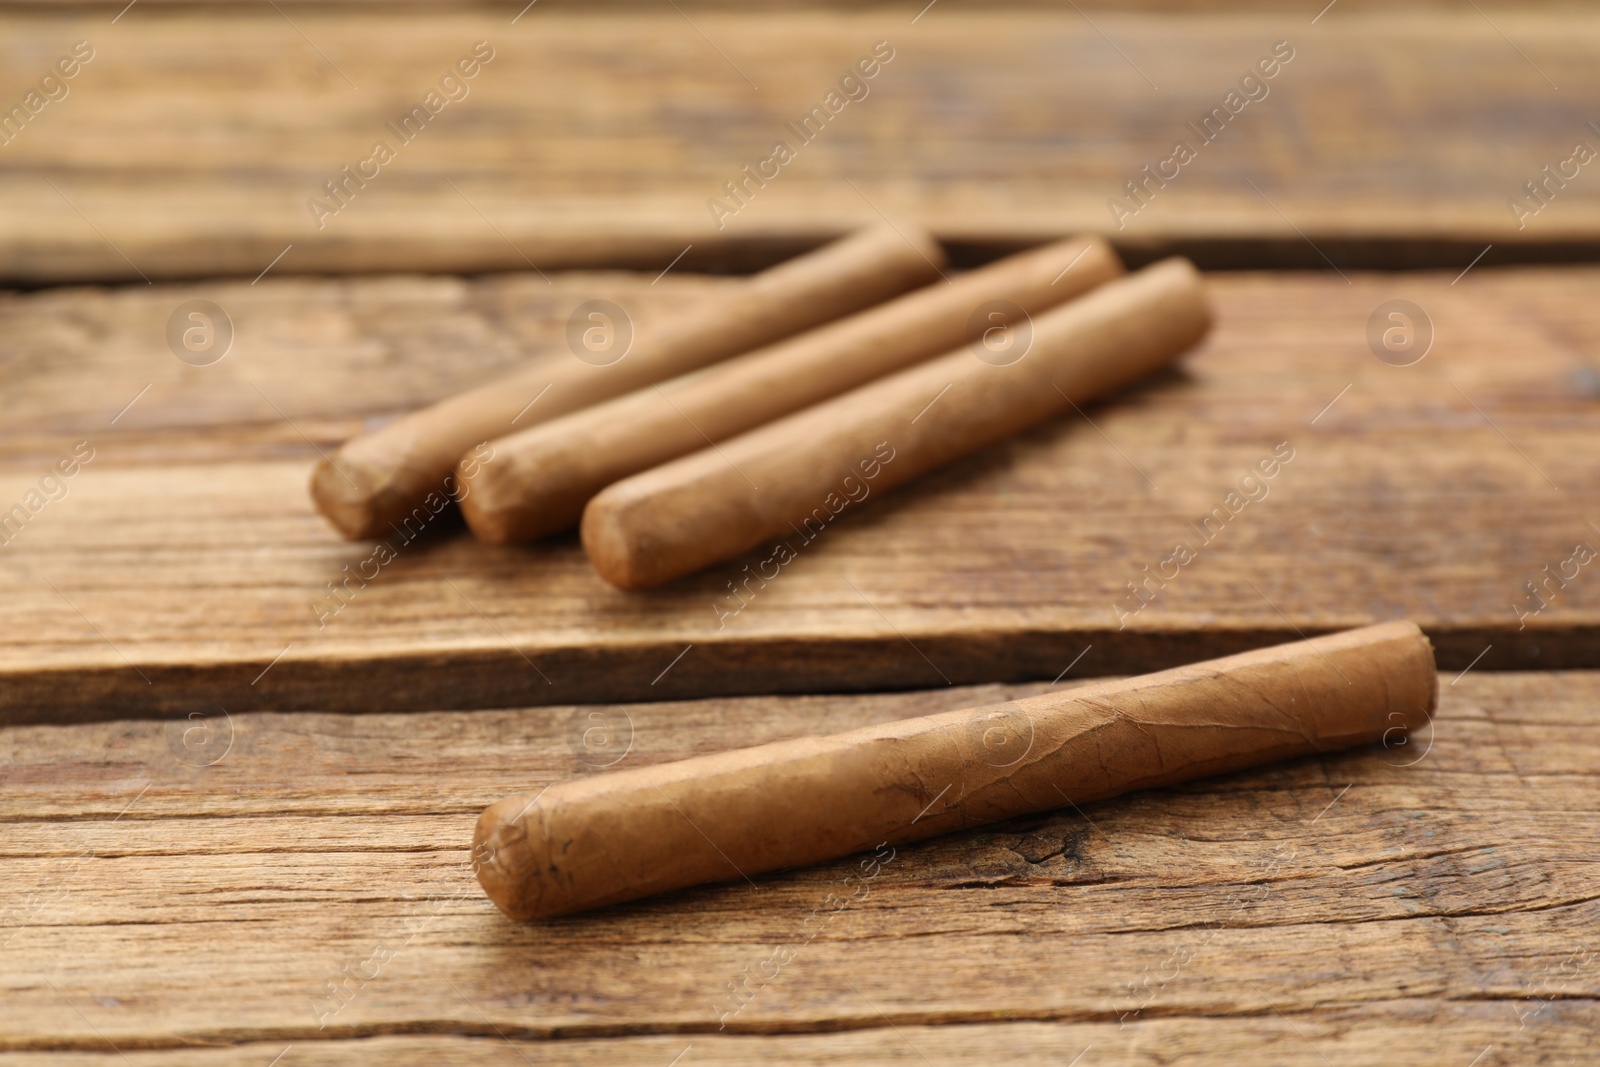 Photo of Many cigars on wooden table. Tobacco smoking